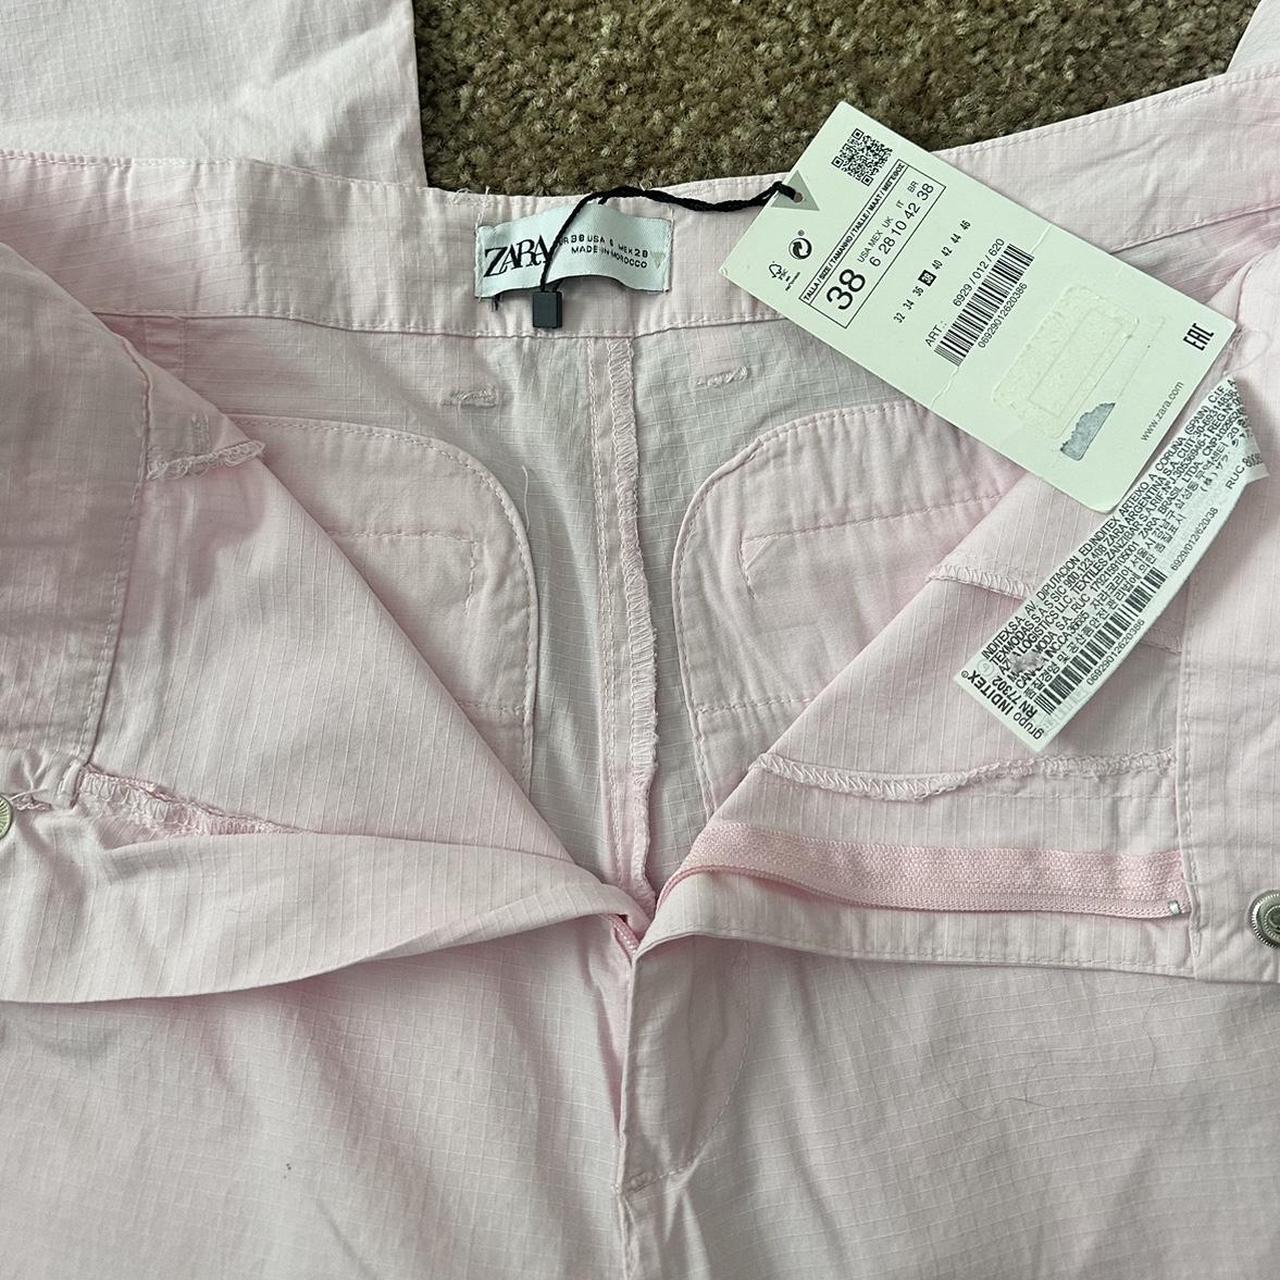 Zara Cargo Pants Light pink, brand new with tags. - Depop